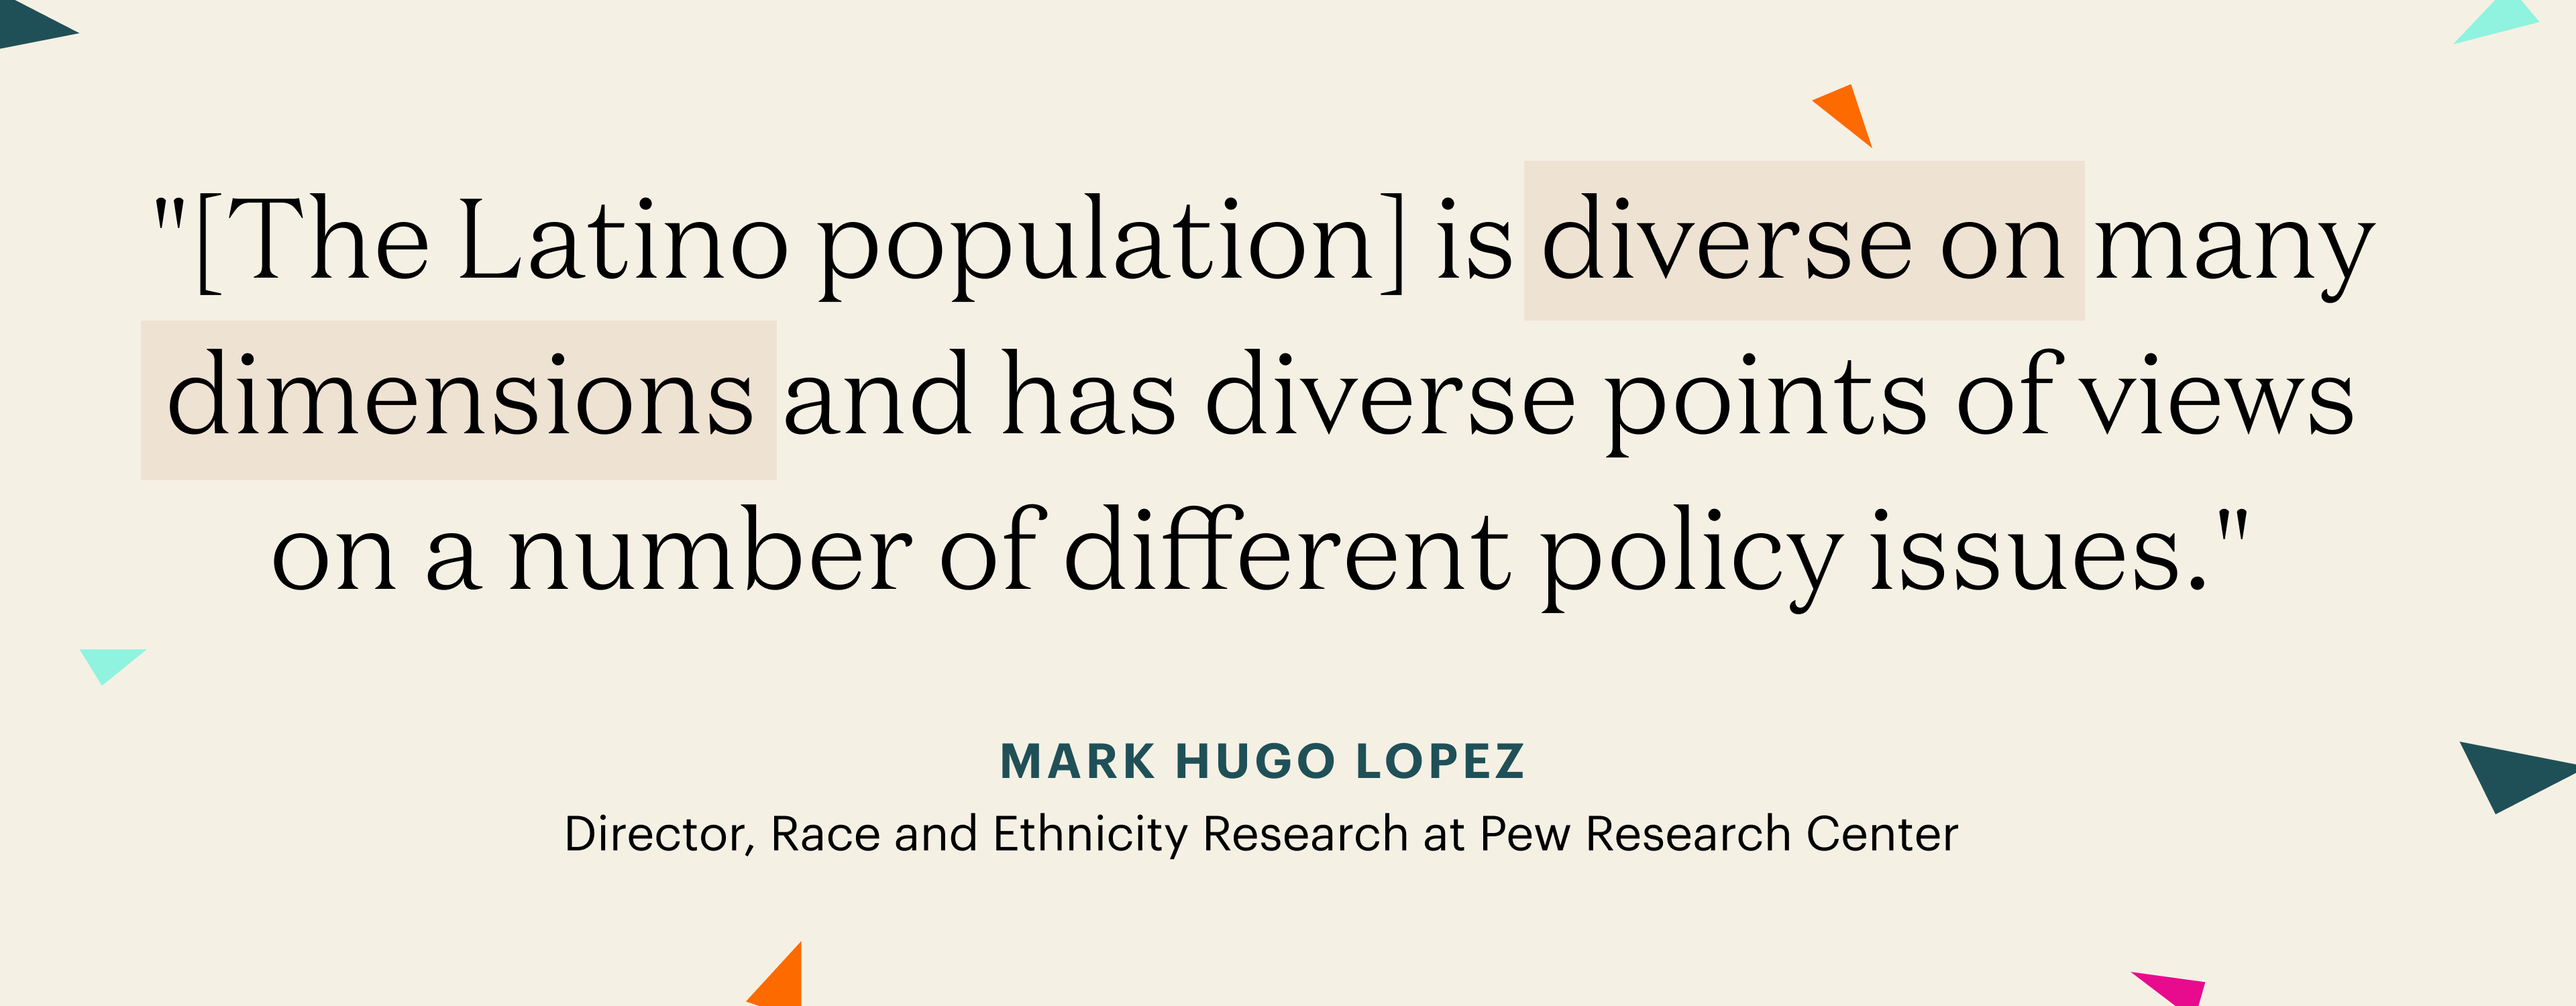 "[The Latino population] is diverse on many dimensions and has diverse points of views on a number of different policy issues" - Mark Hugo Lopez